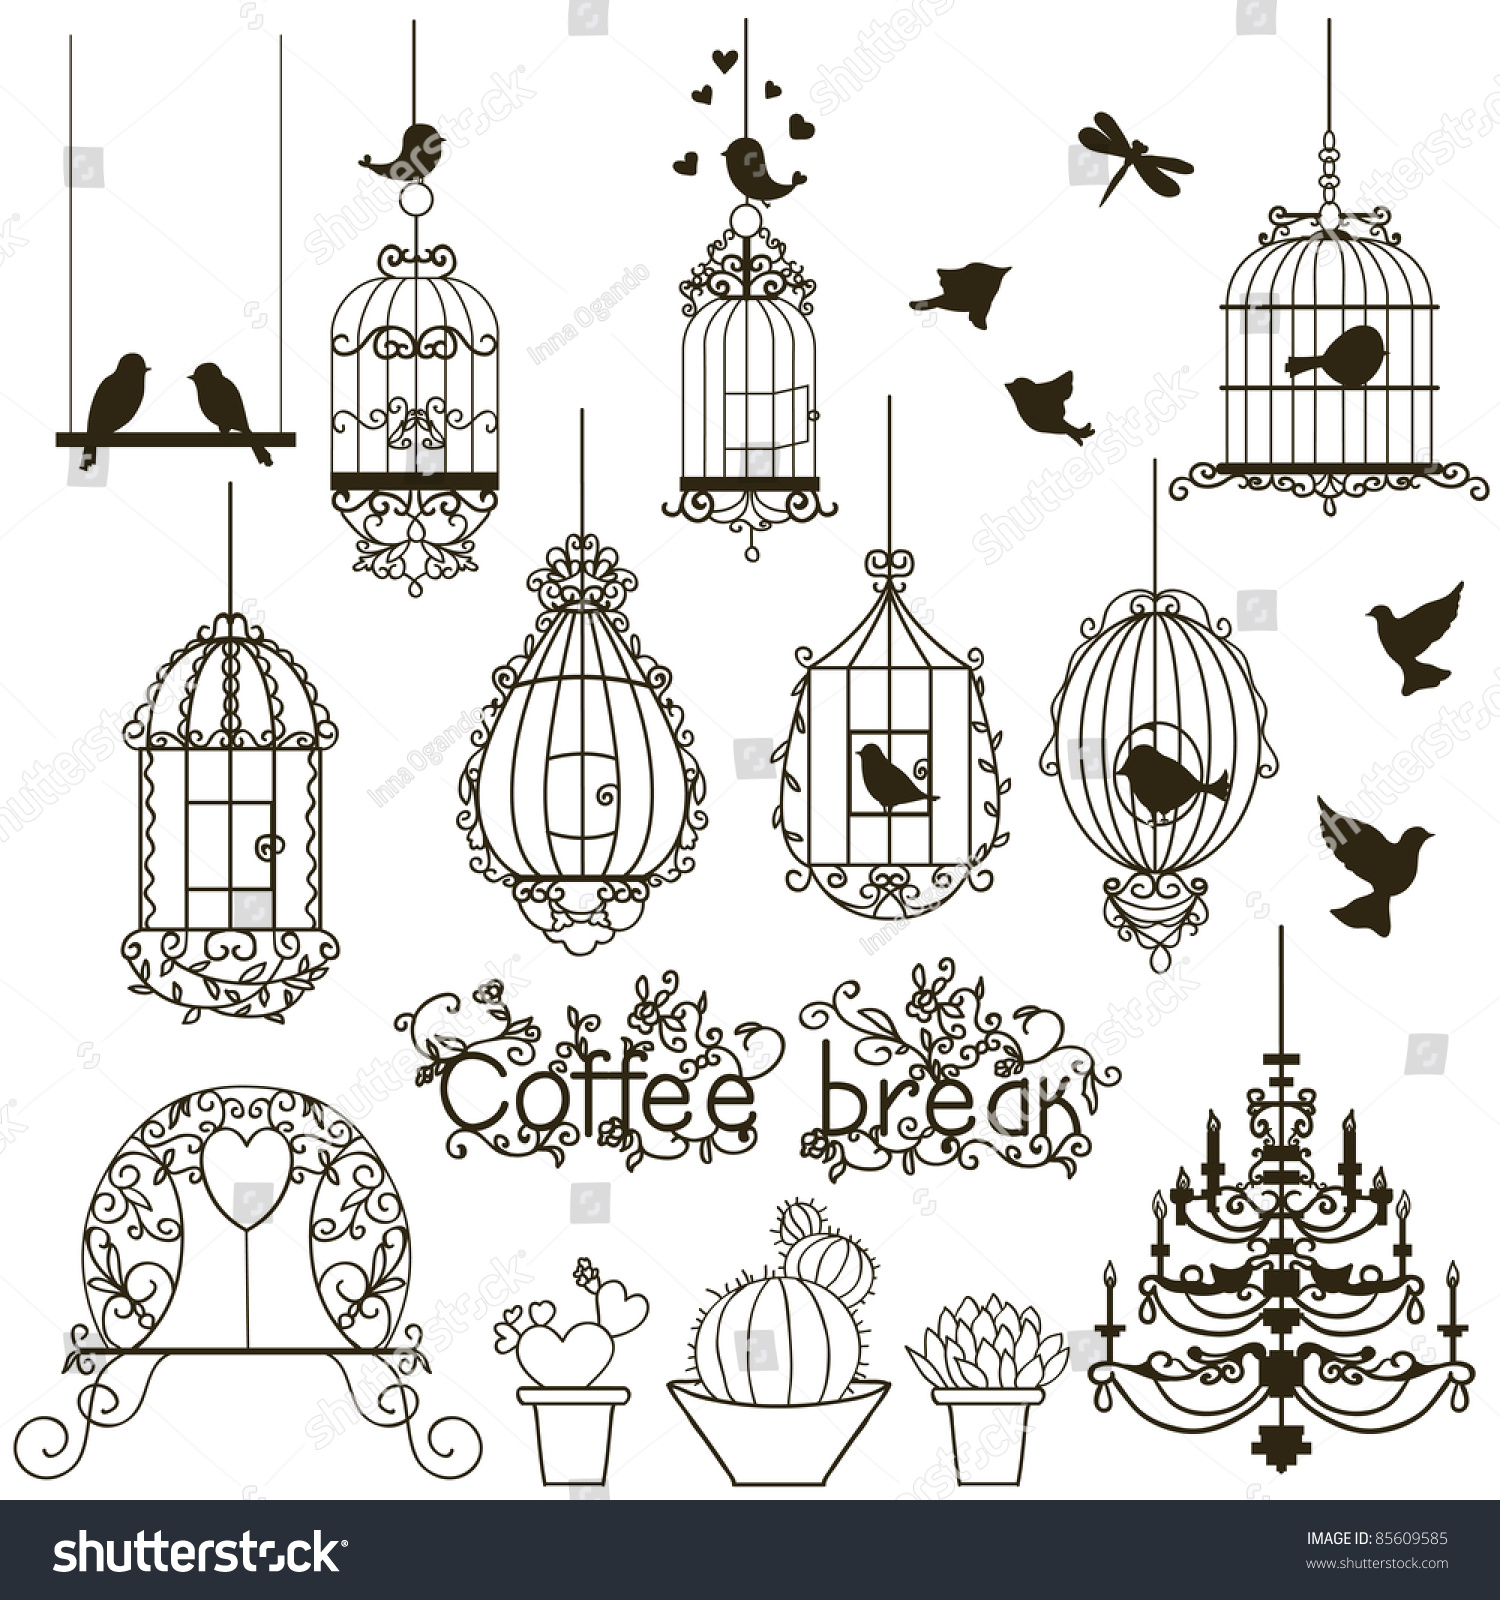 vector clipart collection pack - photo #26